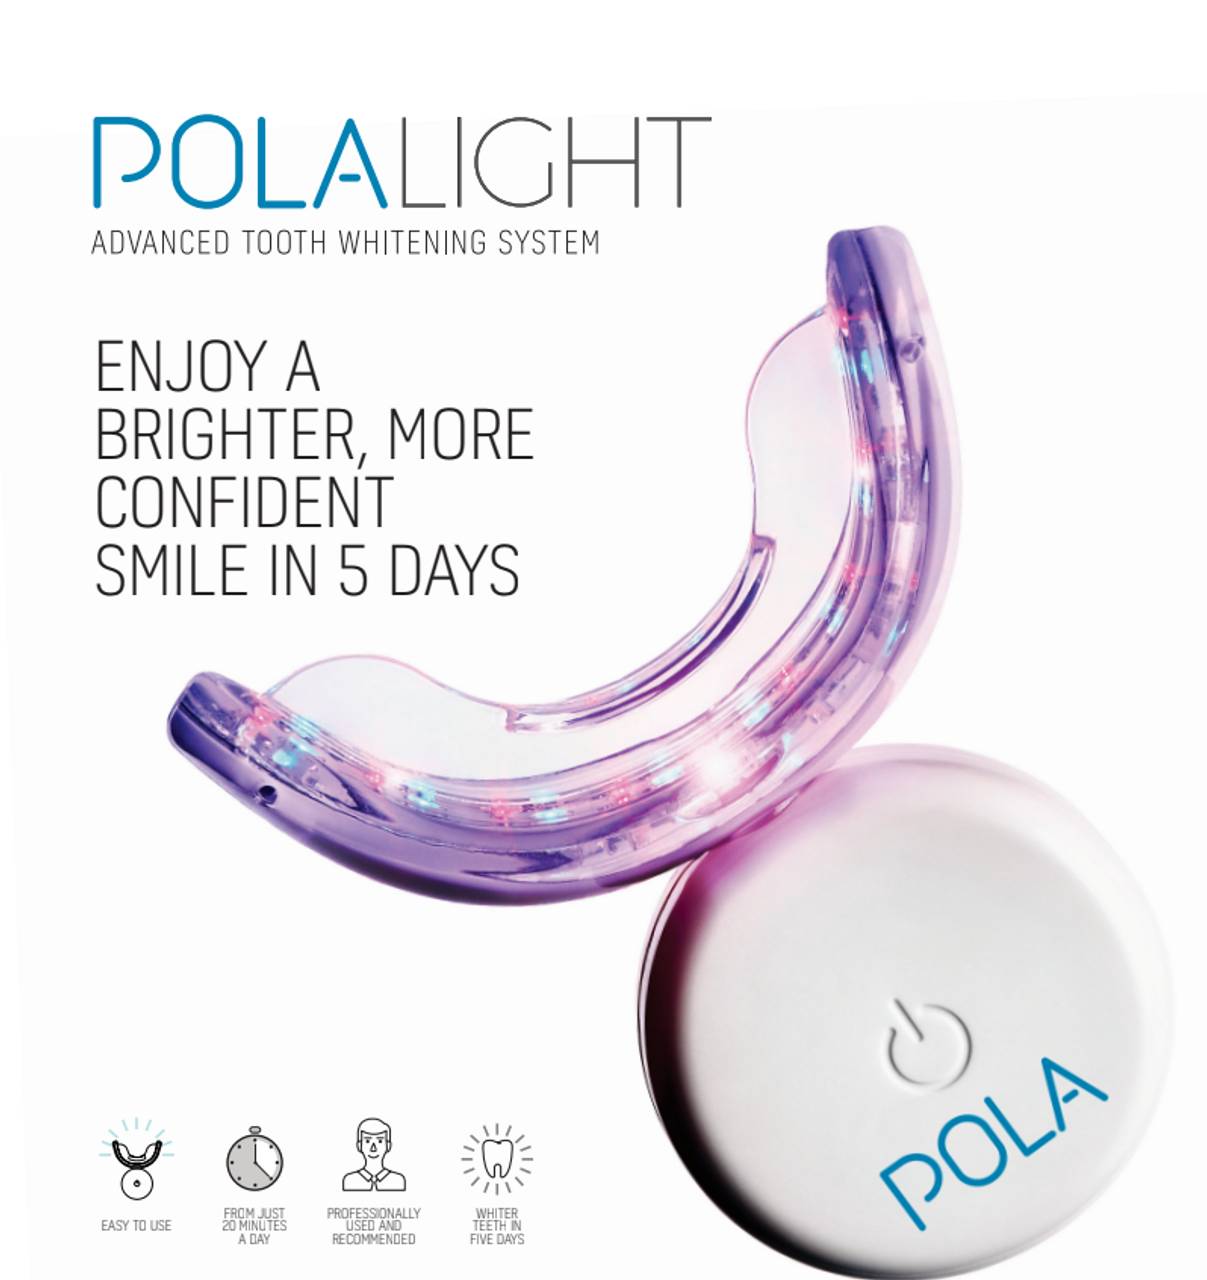 SDI Pola Light Take Home Tooth Whitening Systems, 9.5% Hydrogen Peroxide (Day)